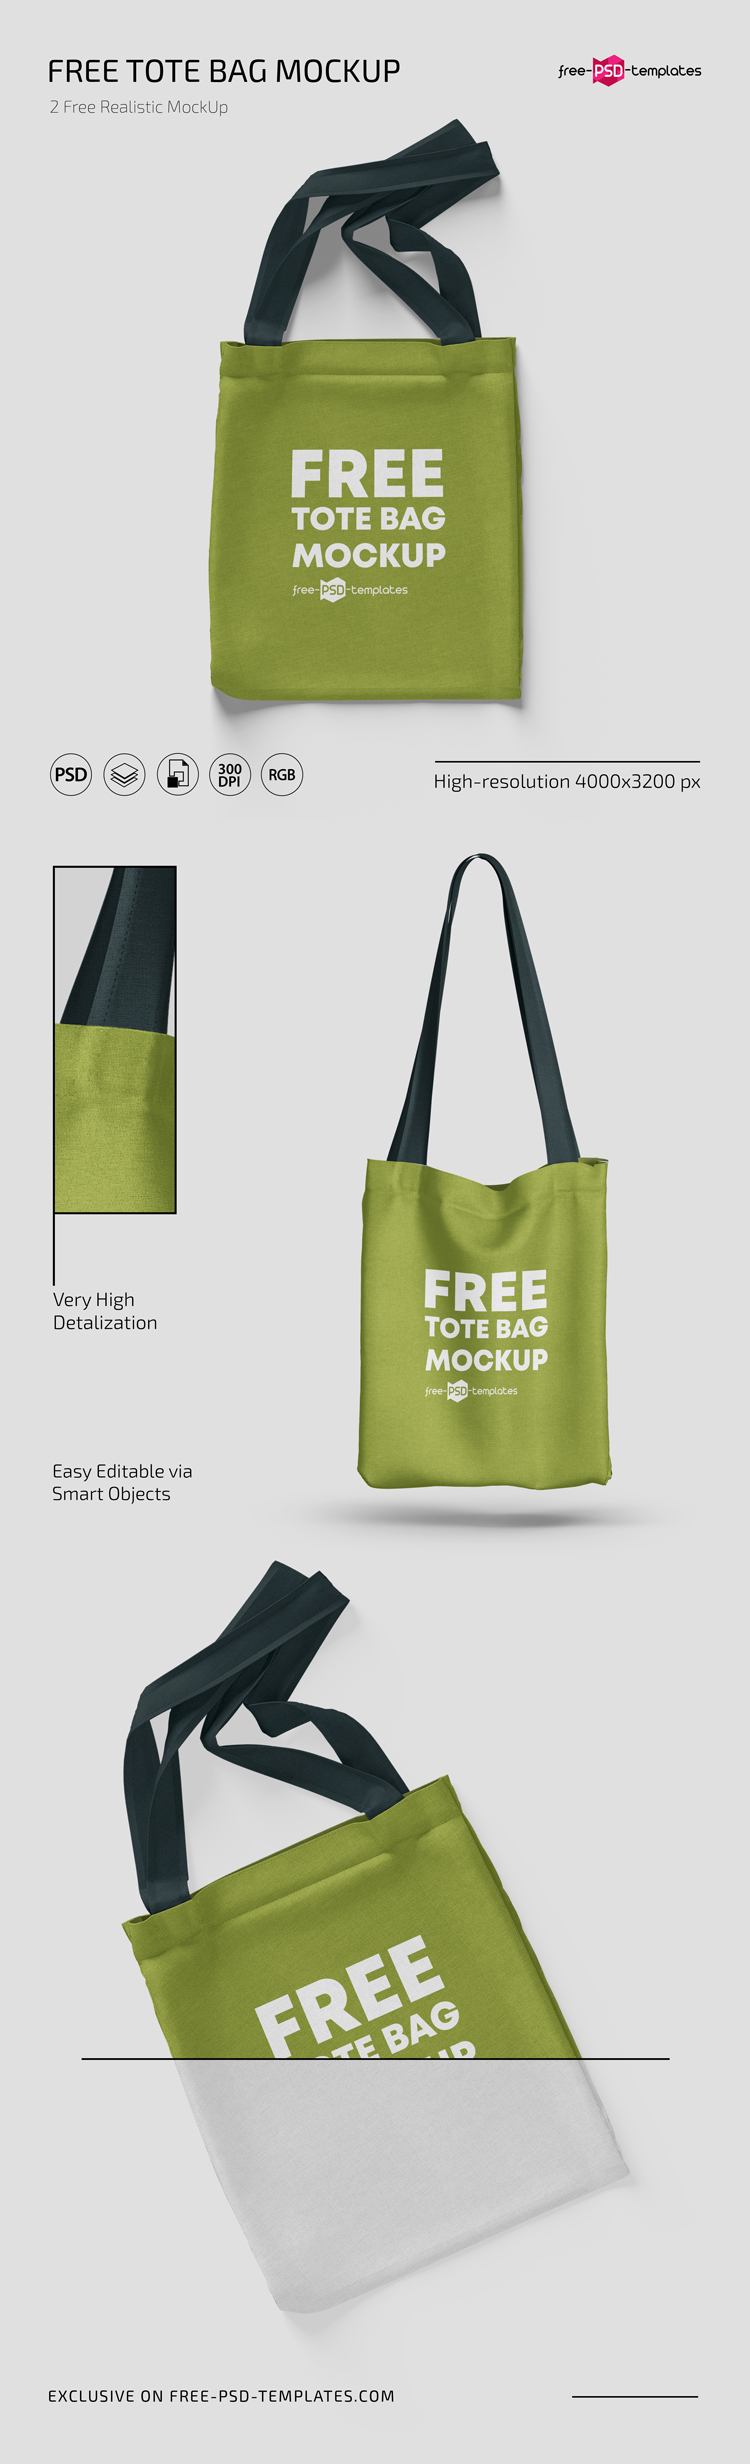 Download Free Tote Bag Mockups In Psd Free Psd Templates